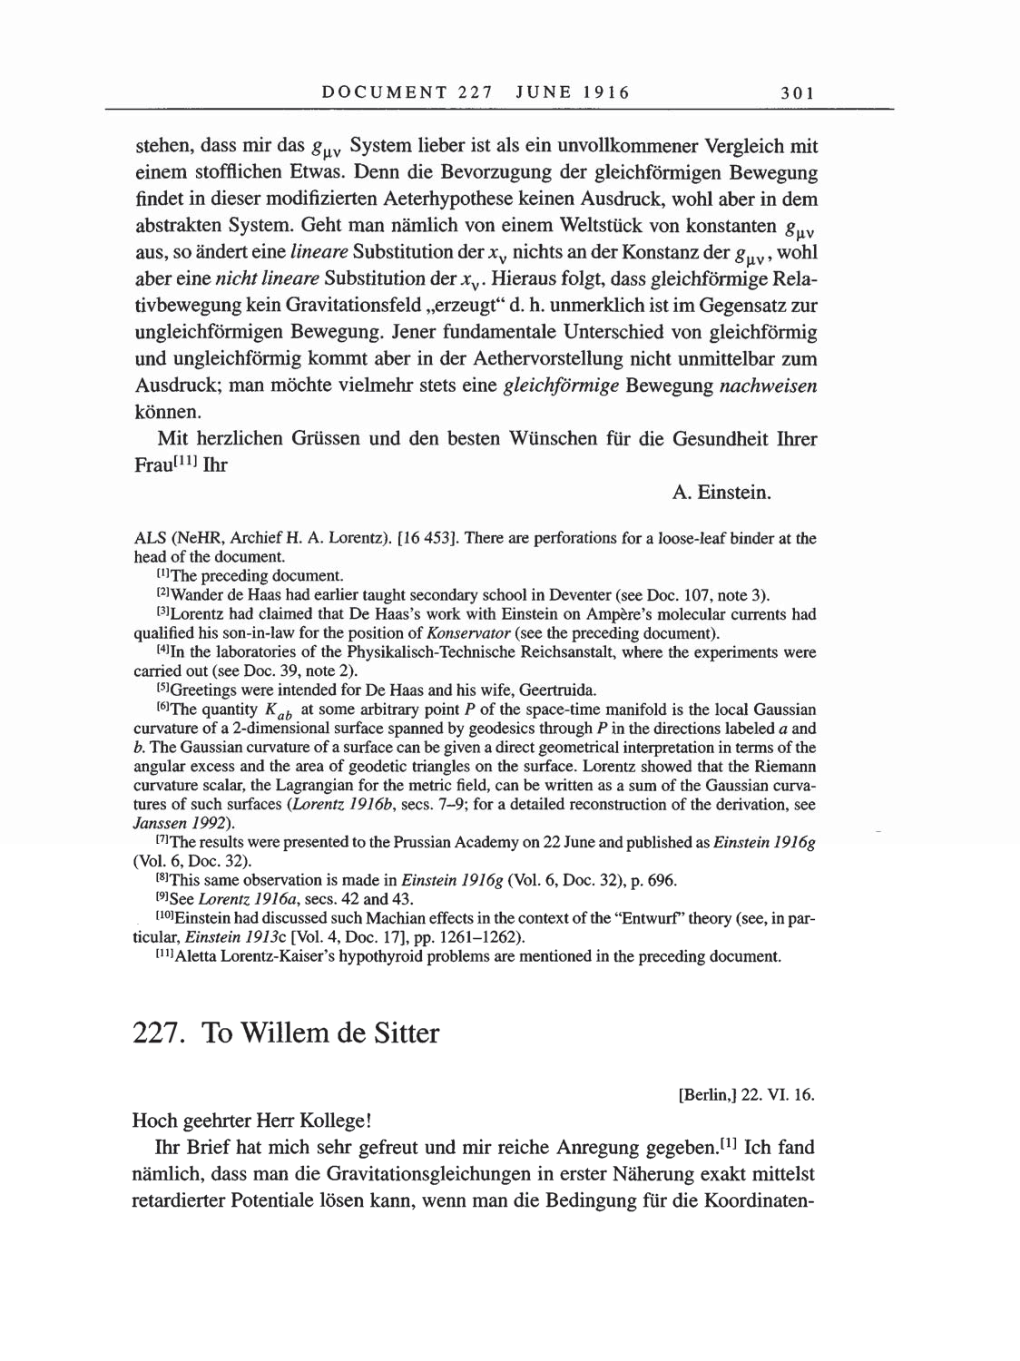 Volume 8, Part A: The Berlin Years: Correspondence 1914-1917 page 301